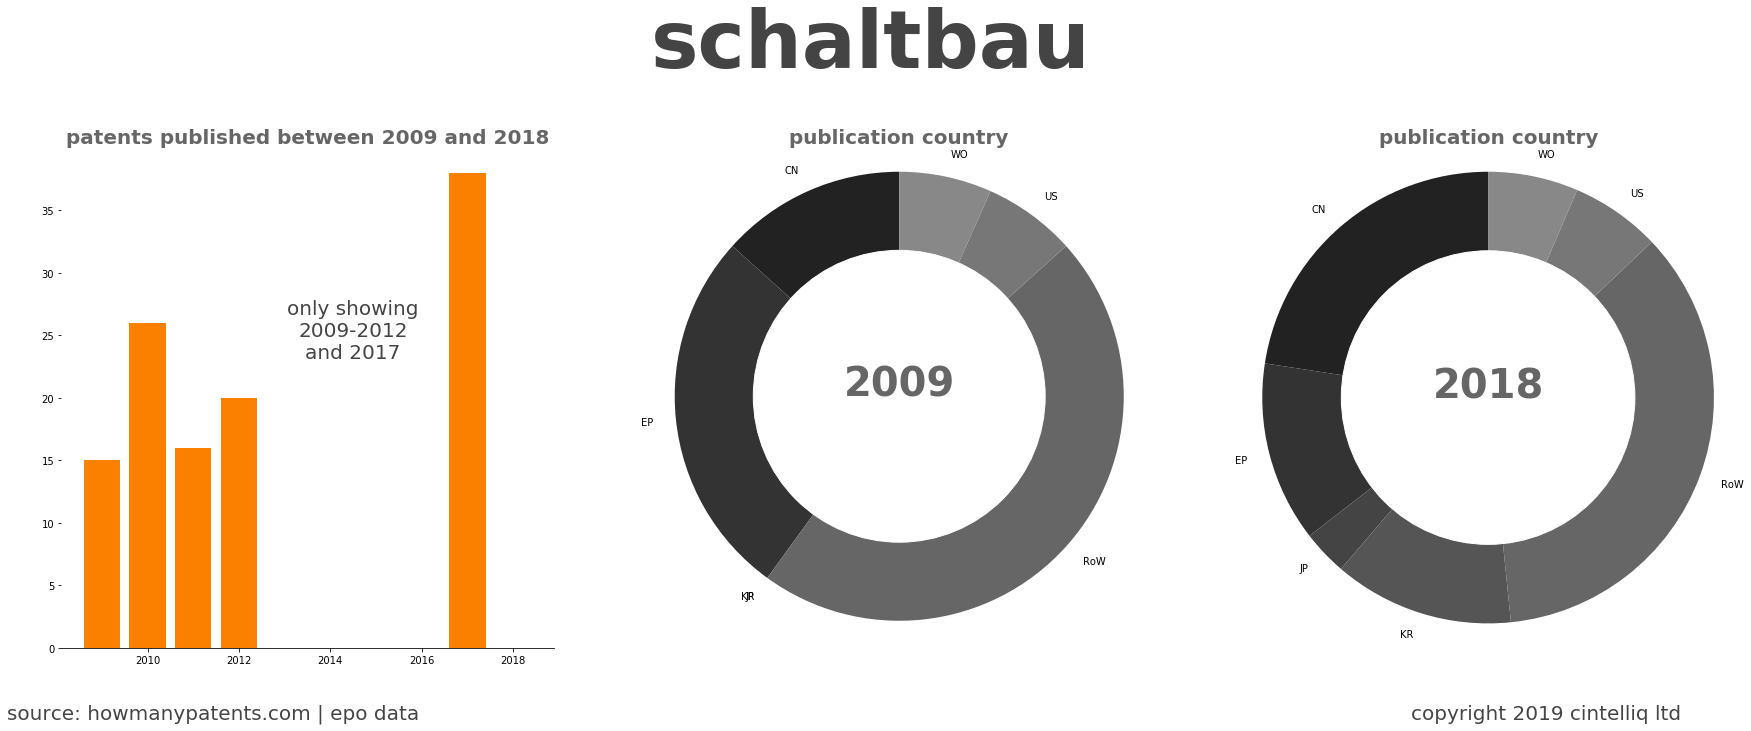 summary of patents for Schaltbau